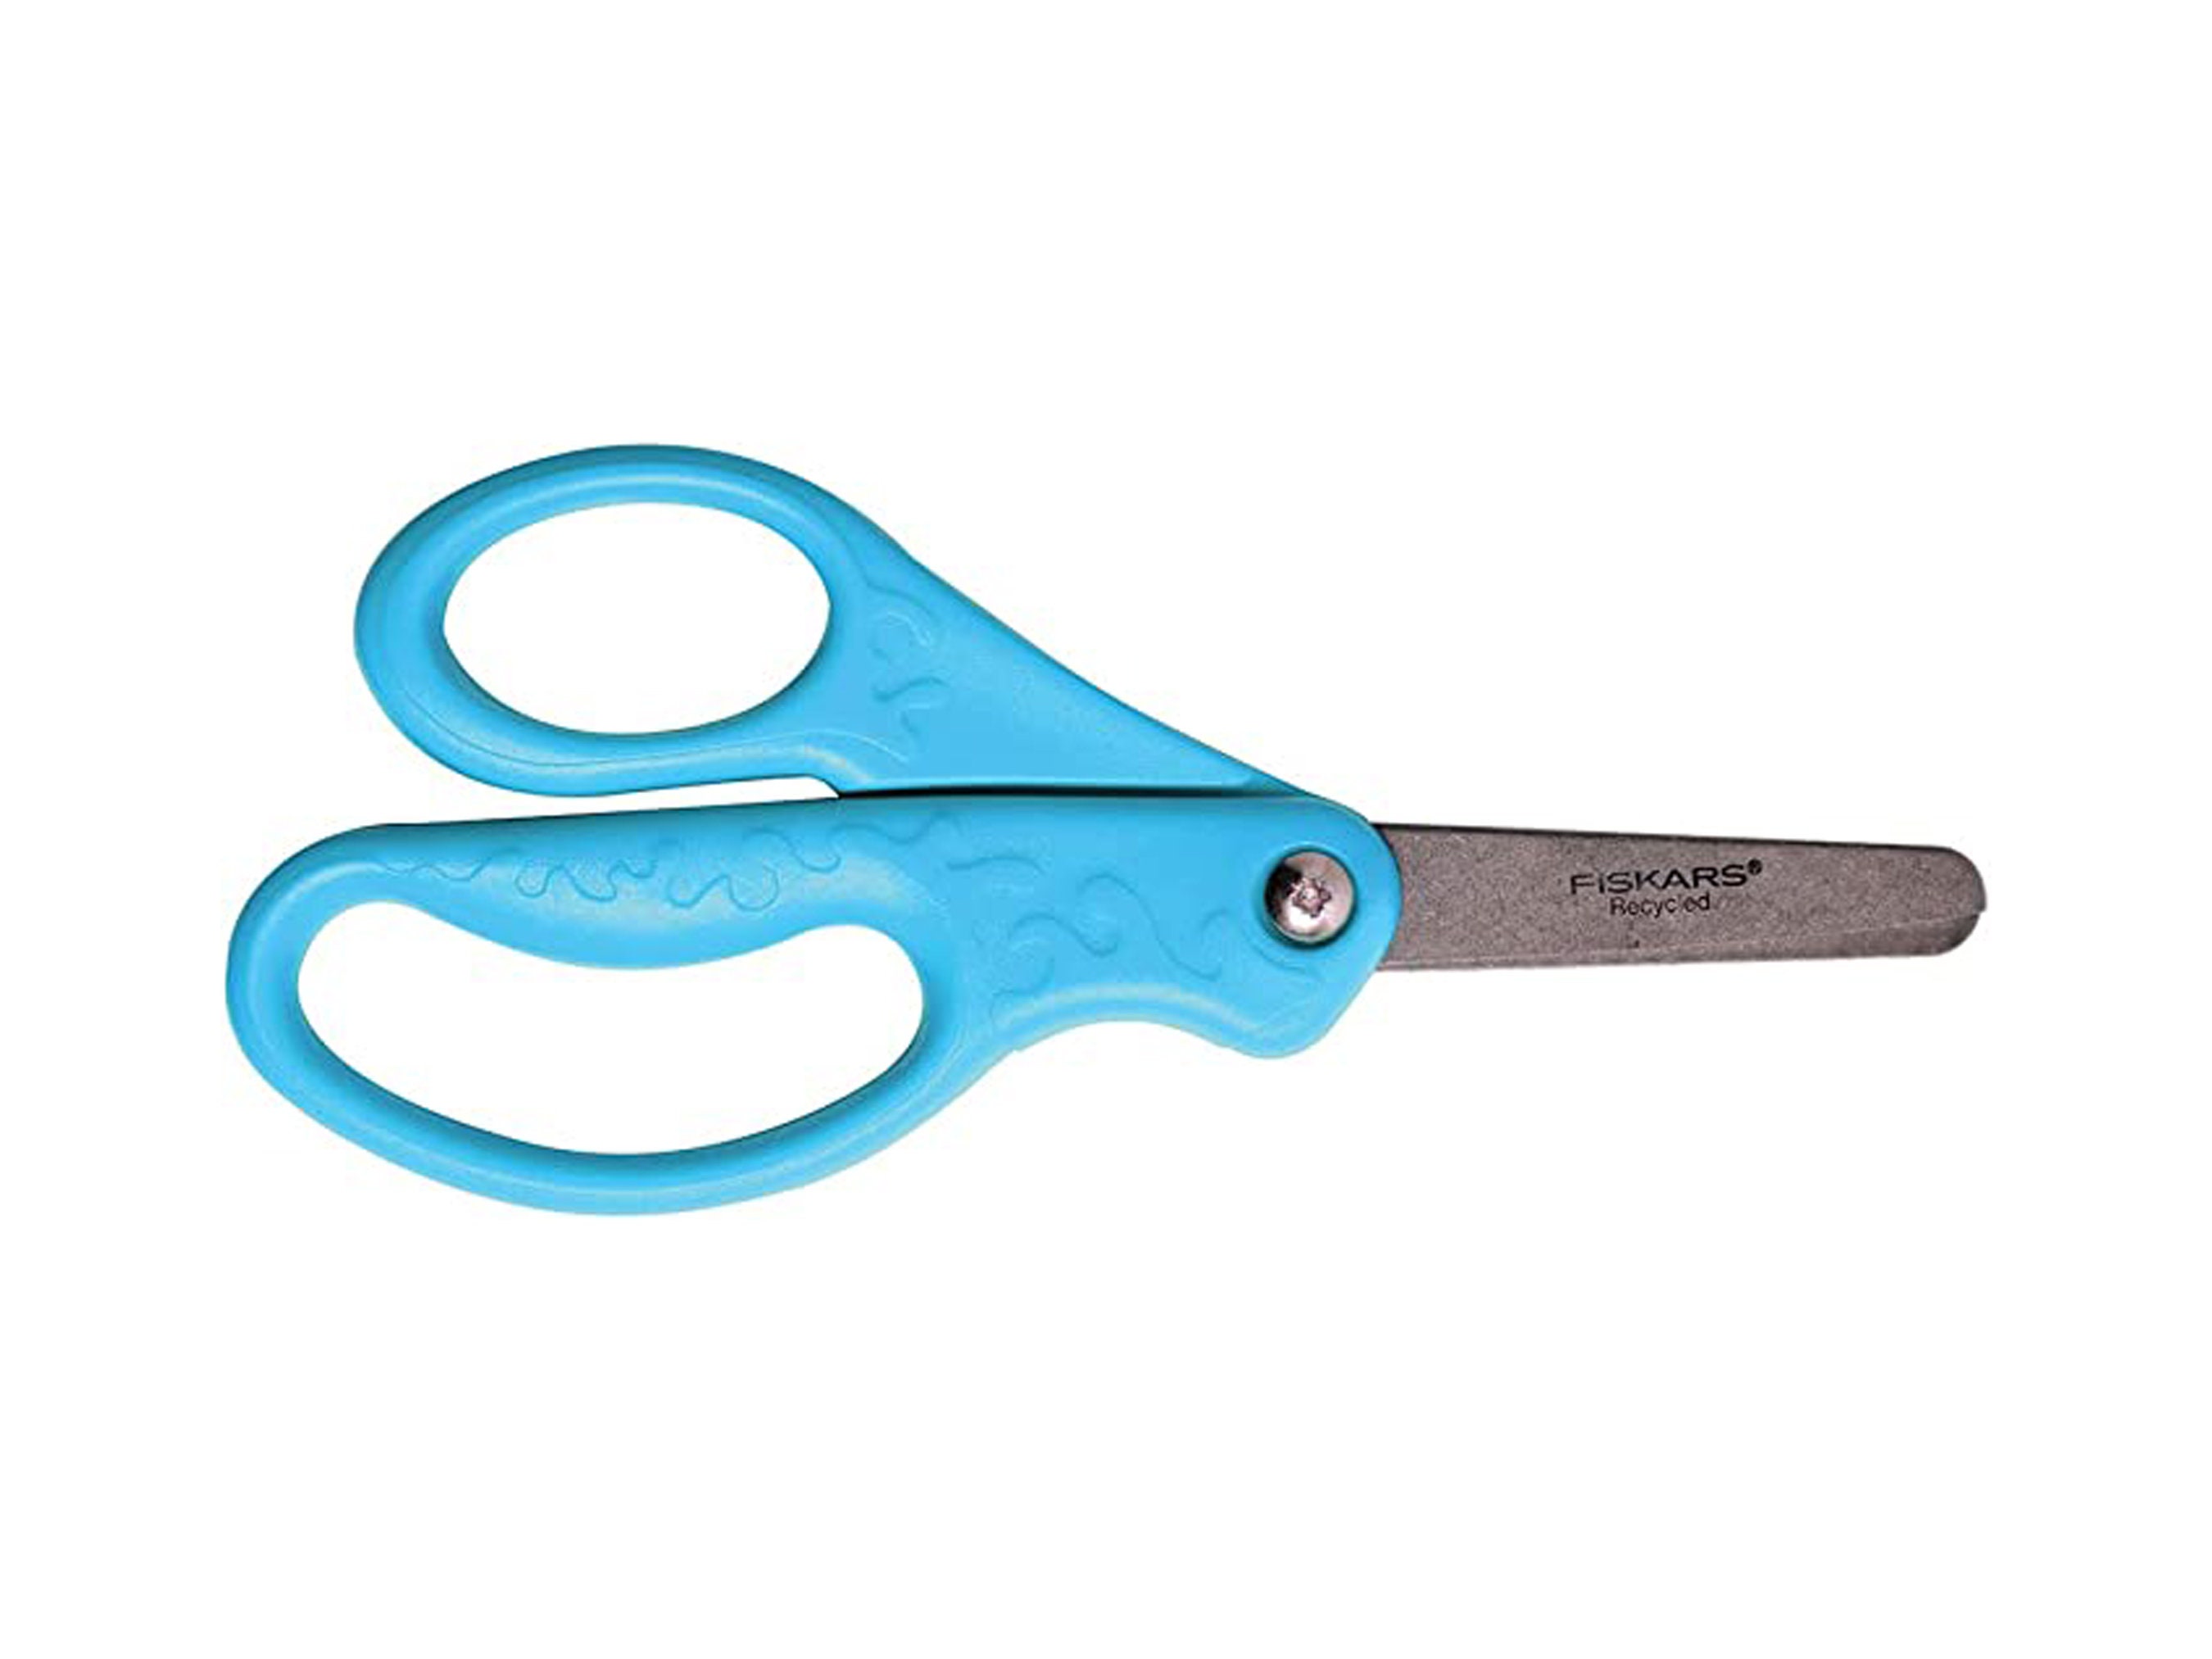 Fiskars Red Handle Lefty Scissors 8 Inches True Left Handed Blades